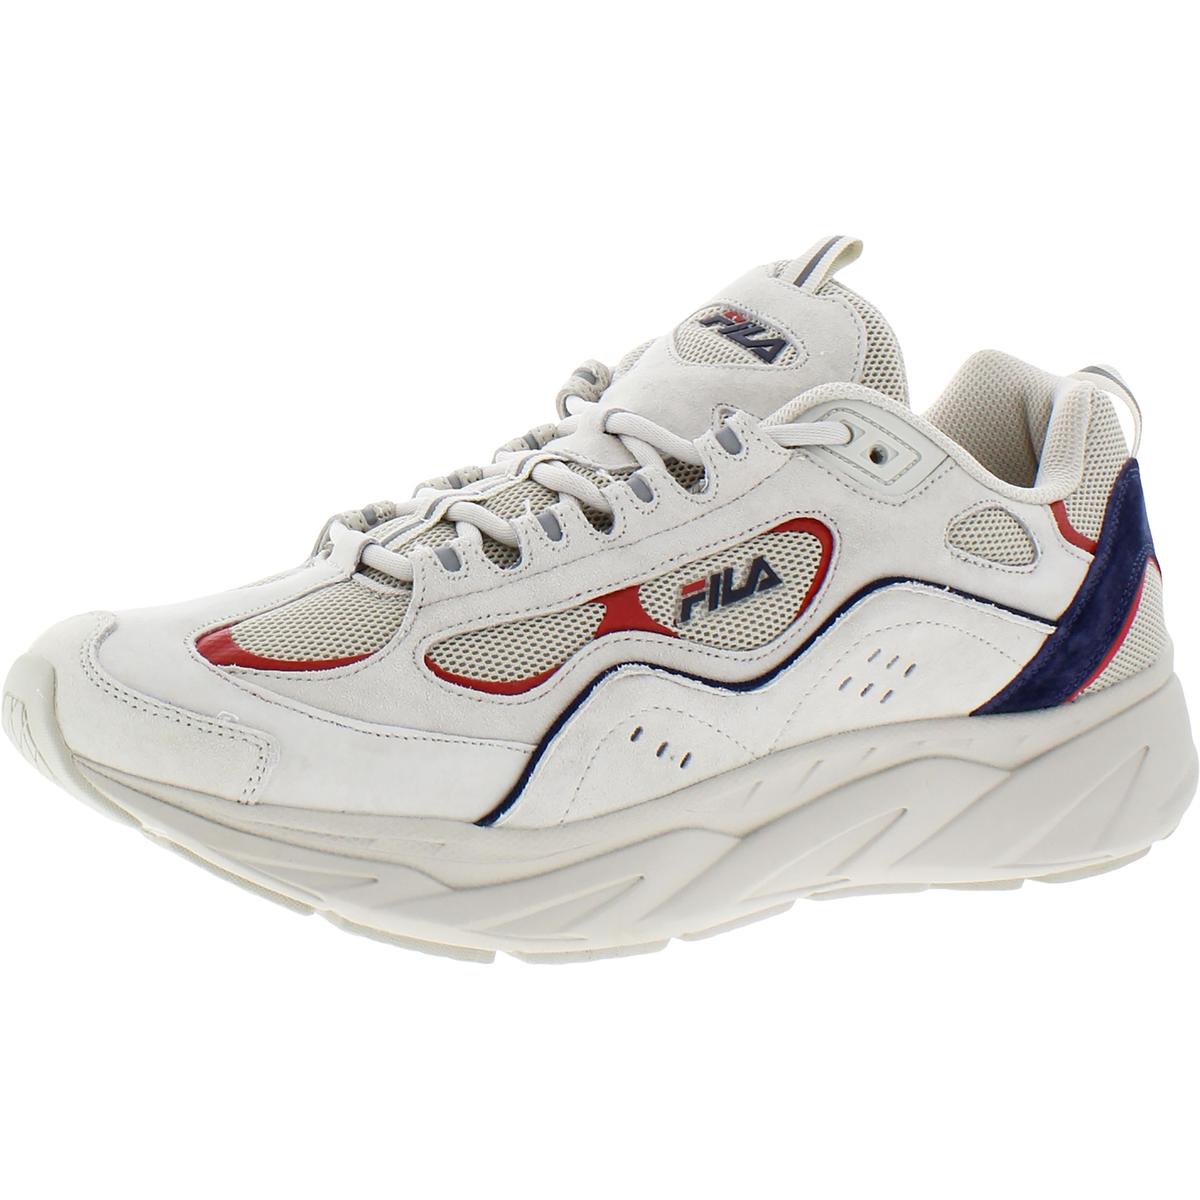 Fila Mens Trigate Workout Fitness Trainers Sneakers Athletic BHFO 2602 ...